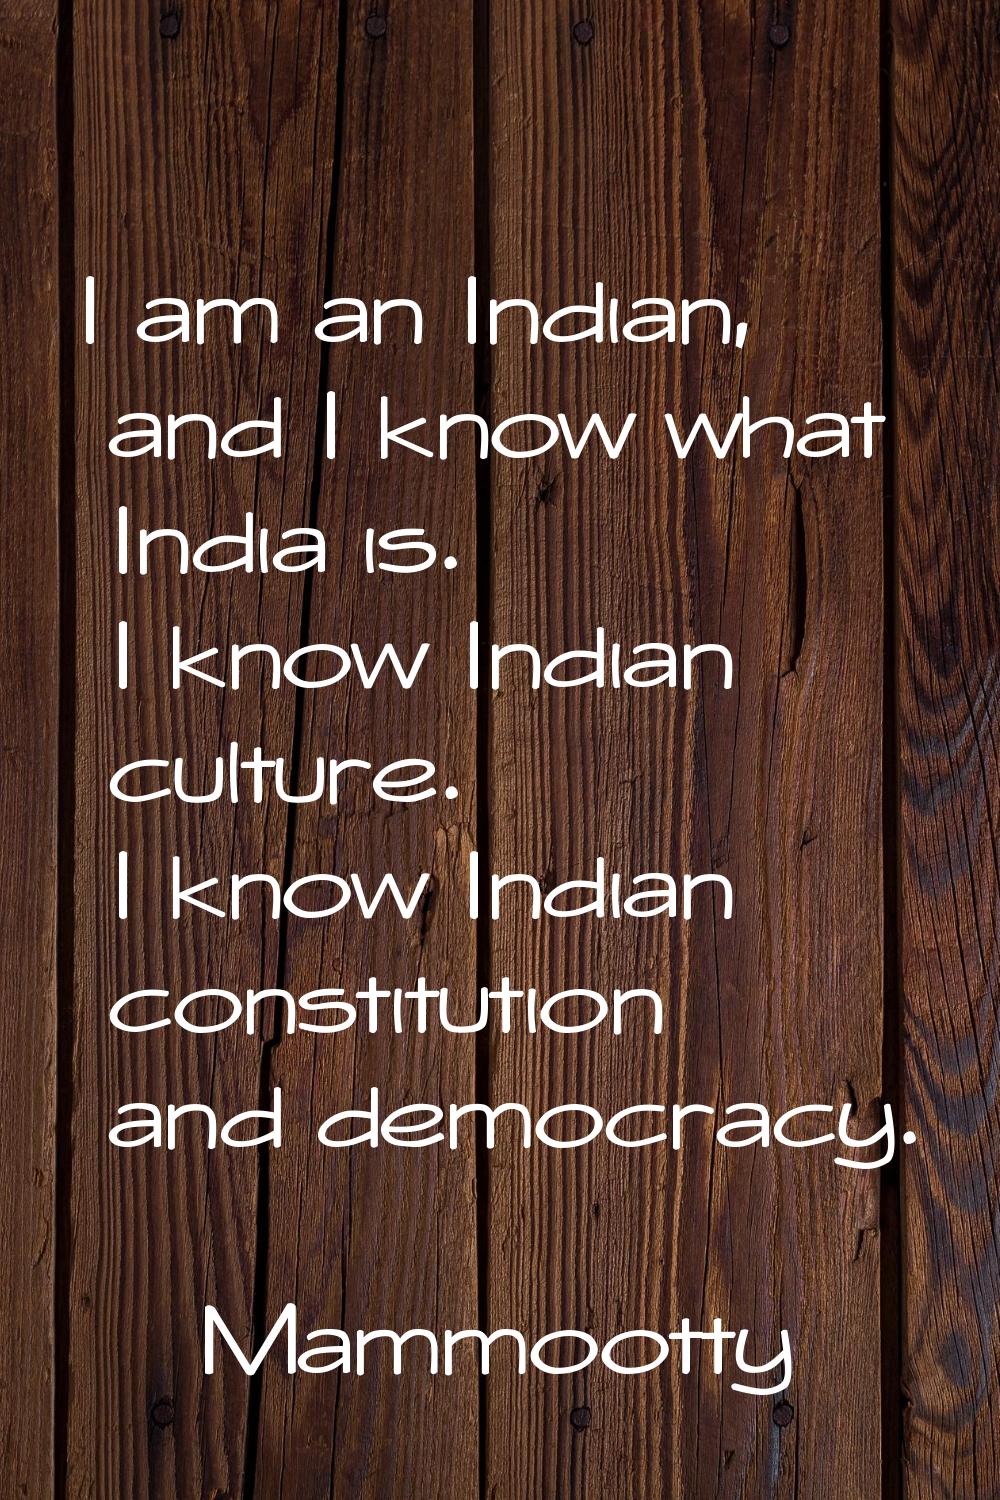 I am an Indian, and I know what India is. I know Indian culture. I know Indian constitution and dem